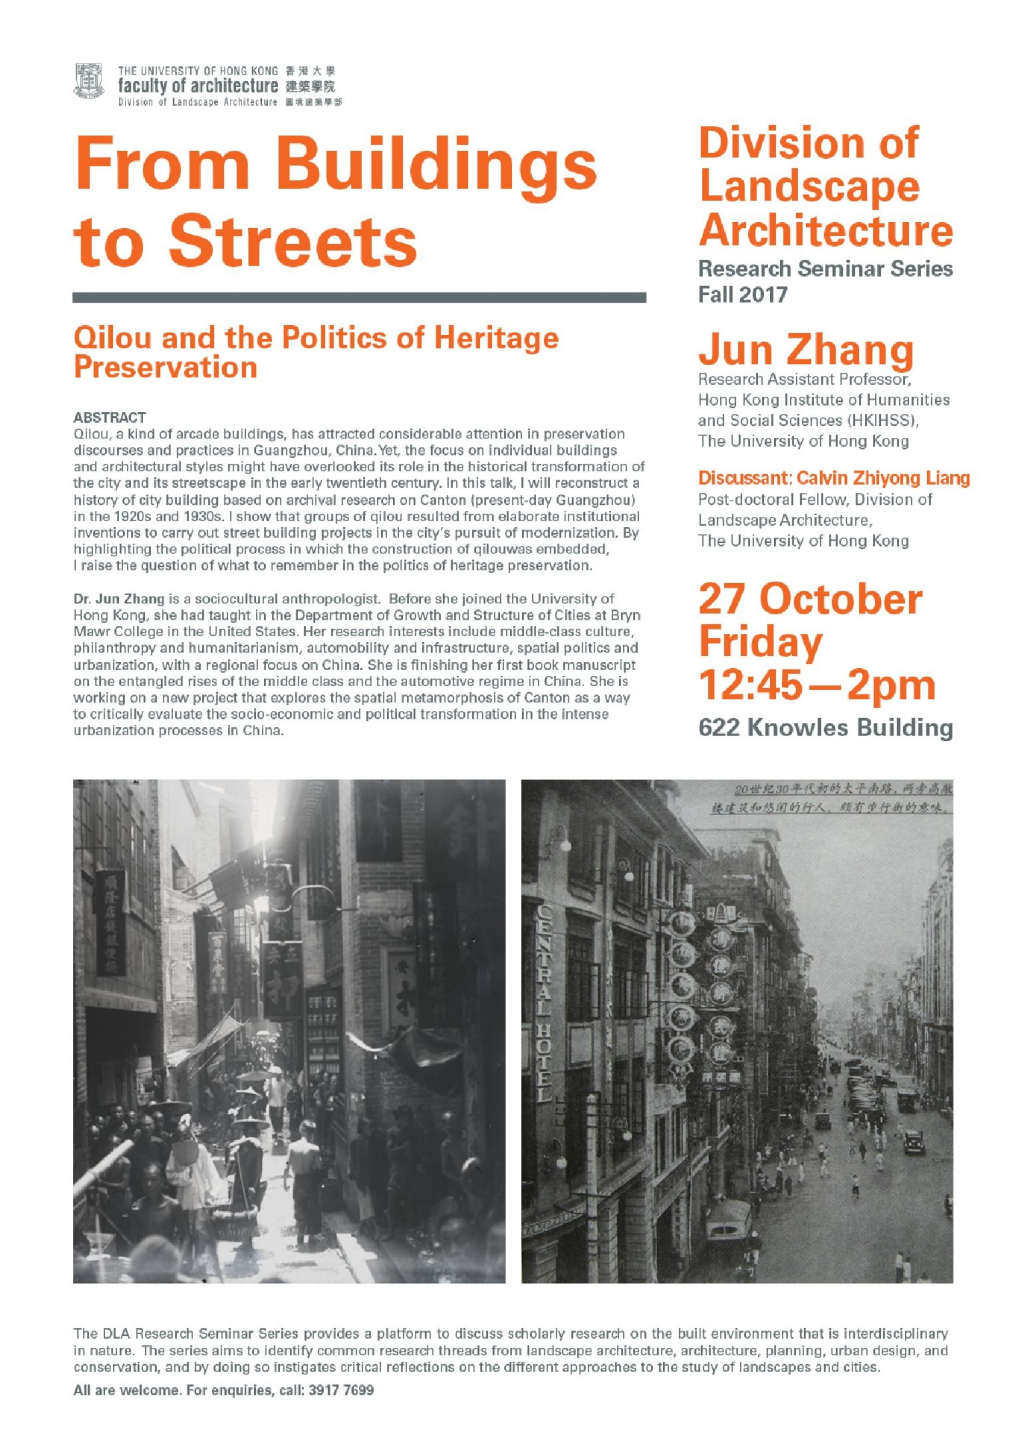 DLA Research Seminar - From Buildings to Streets: Qilou and the Politics of Heritage Preservation